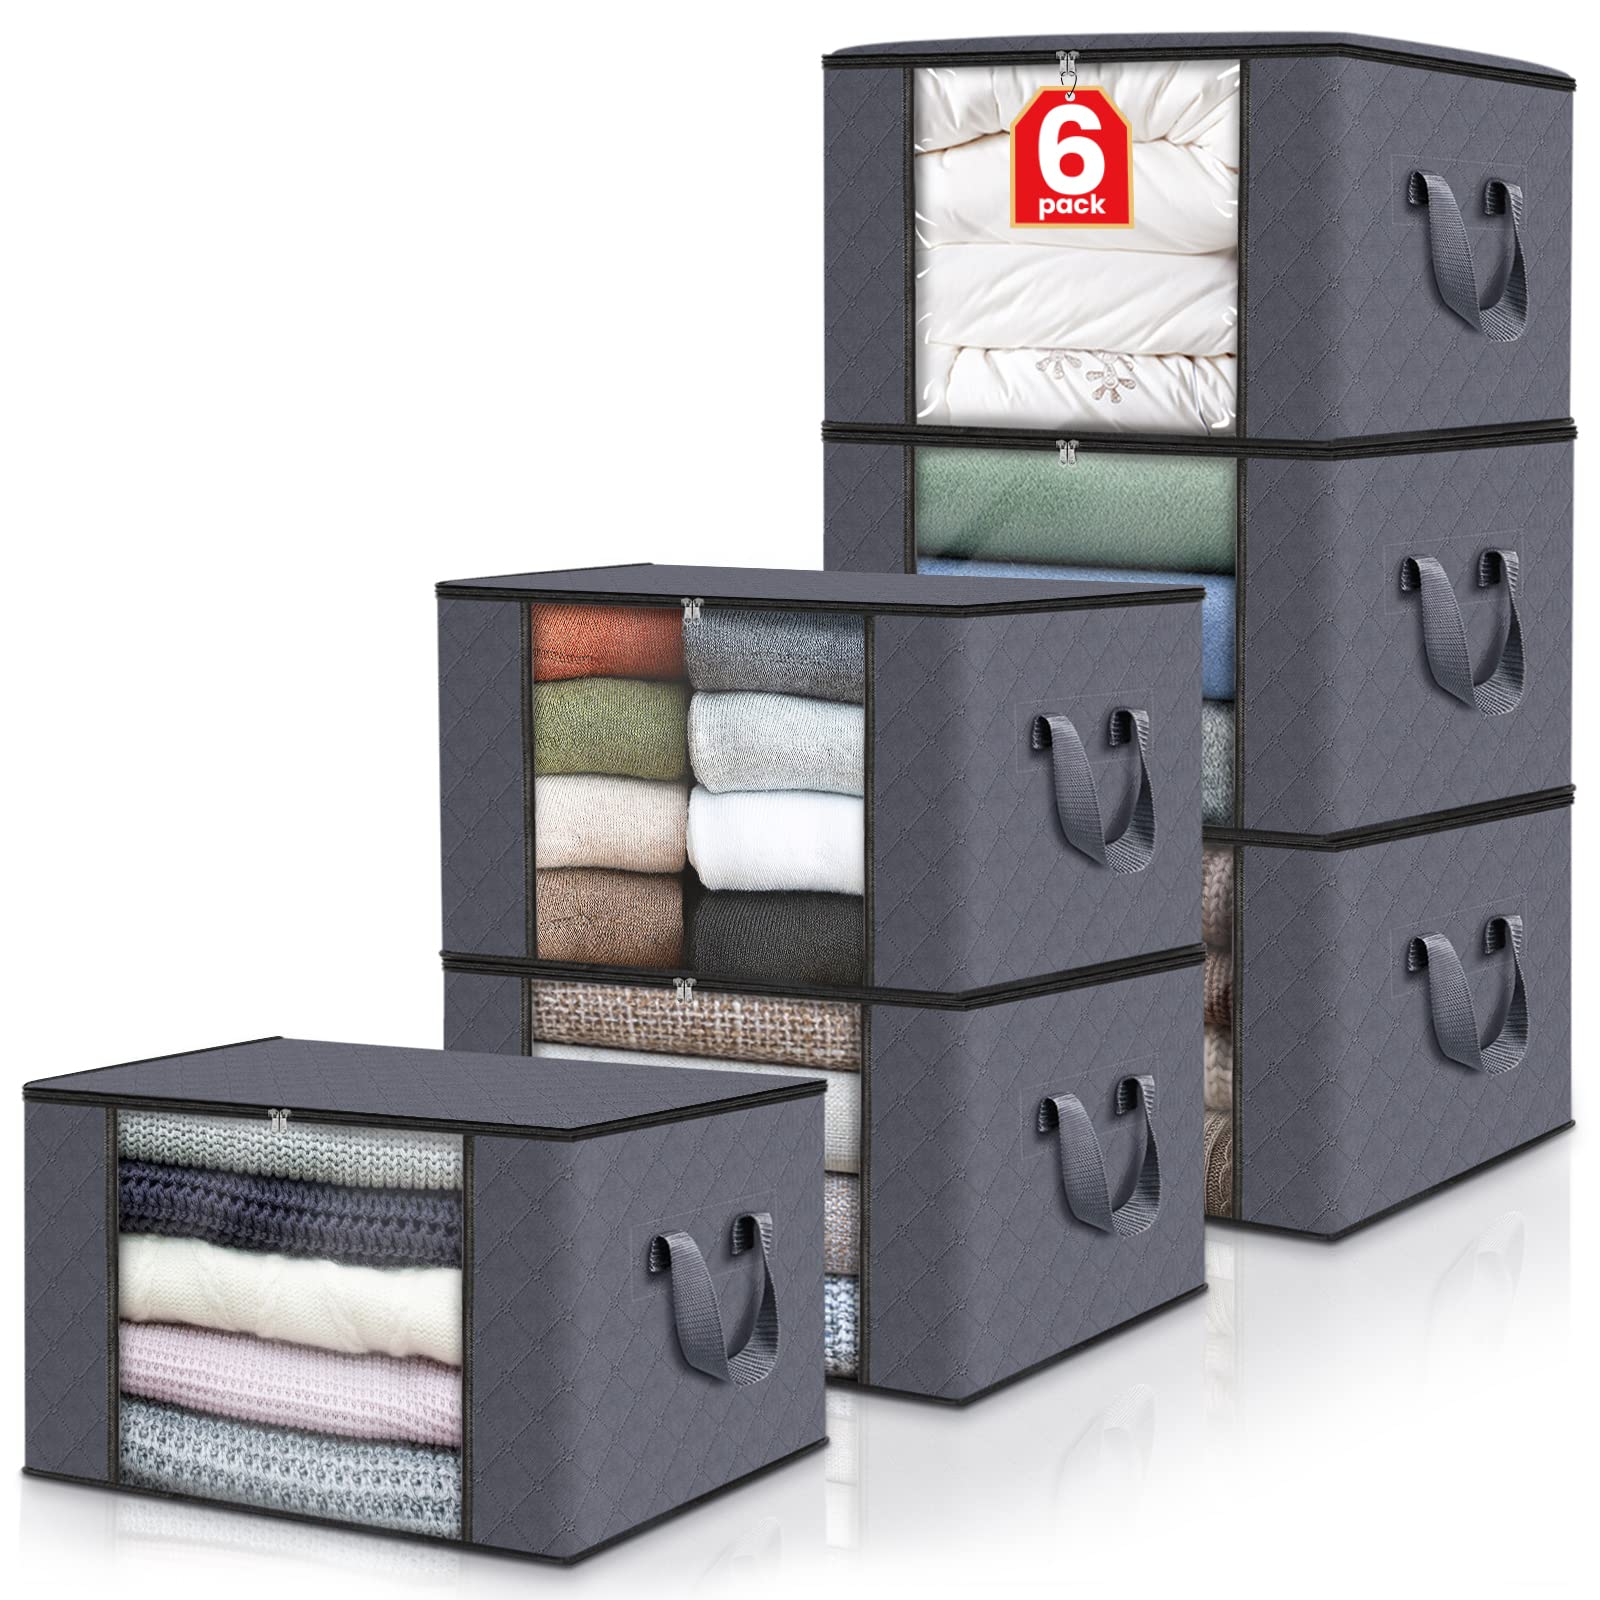 Prime Members: 6-Pack Fab Totes 60L Foldable Clothes/Blanket Storage Bags $12.99 + Free S/H